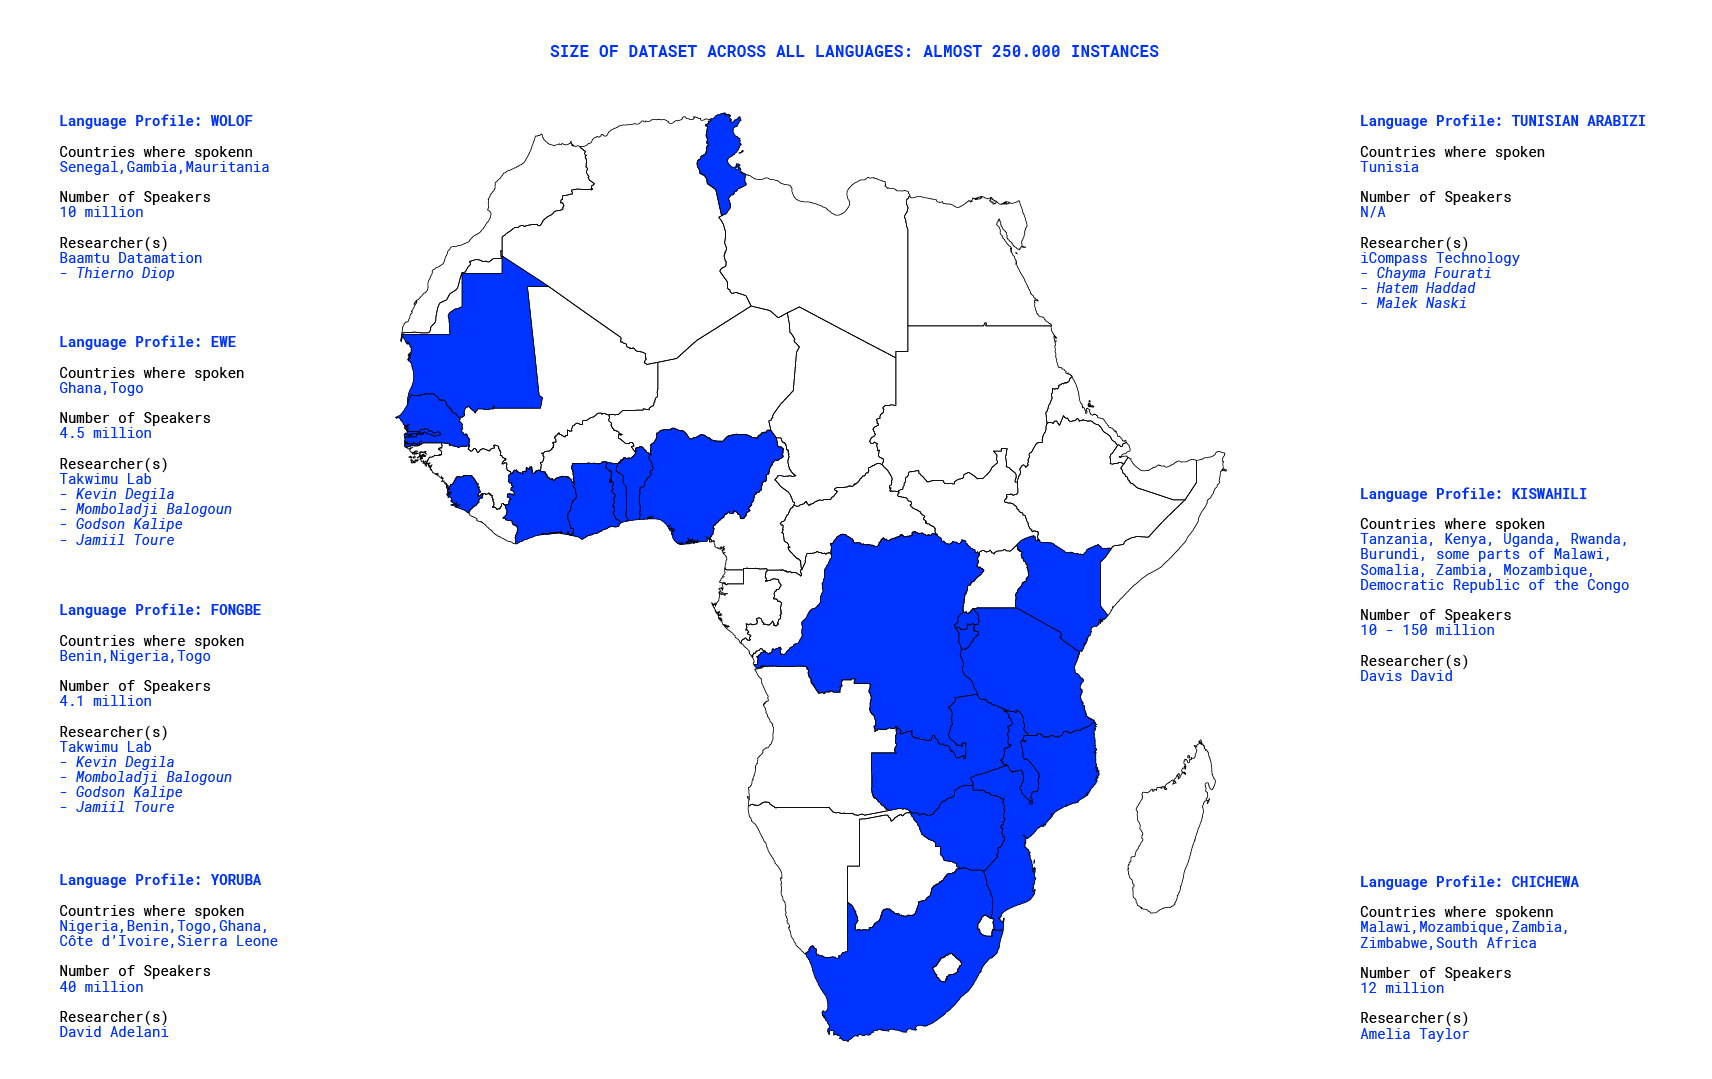 AI4D language profiles for Low Resource African Languages